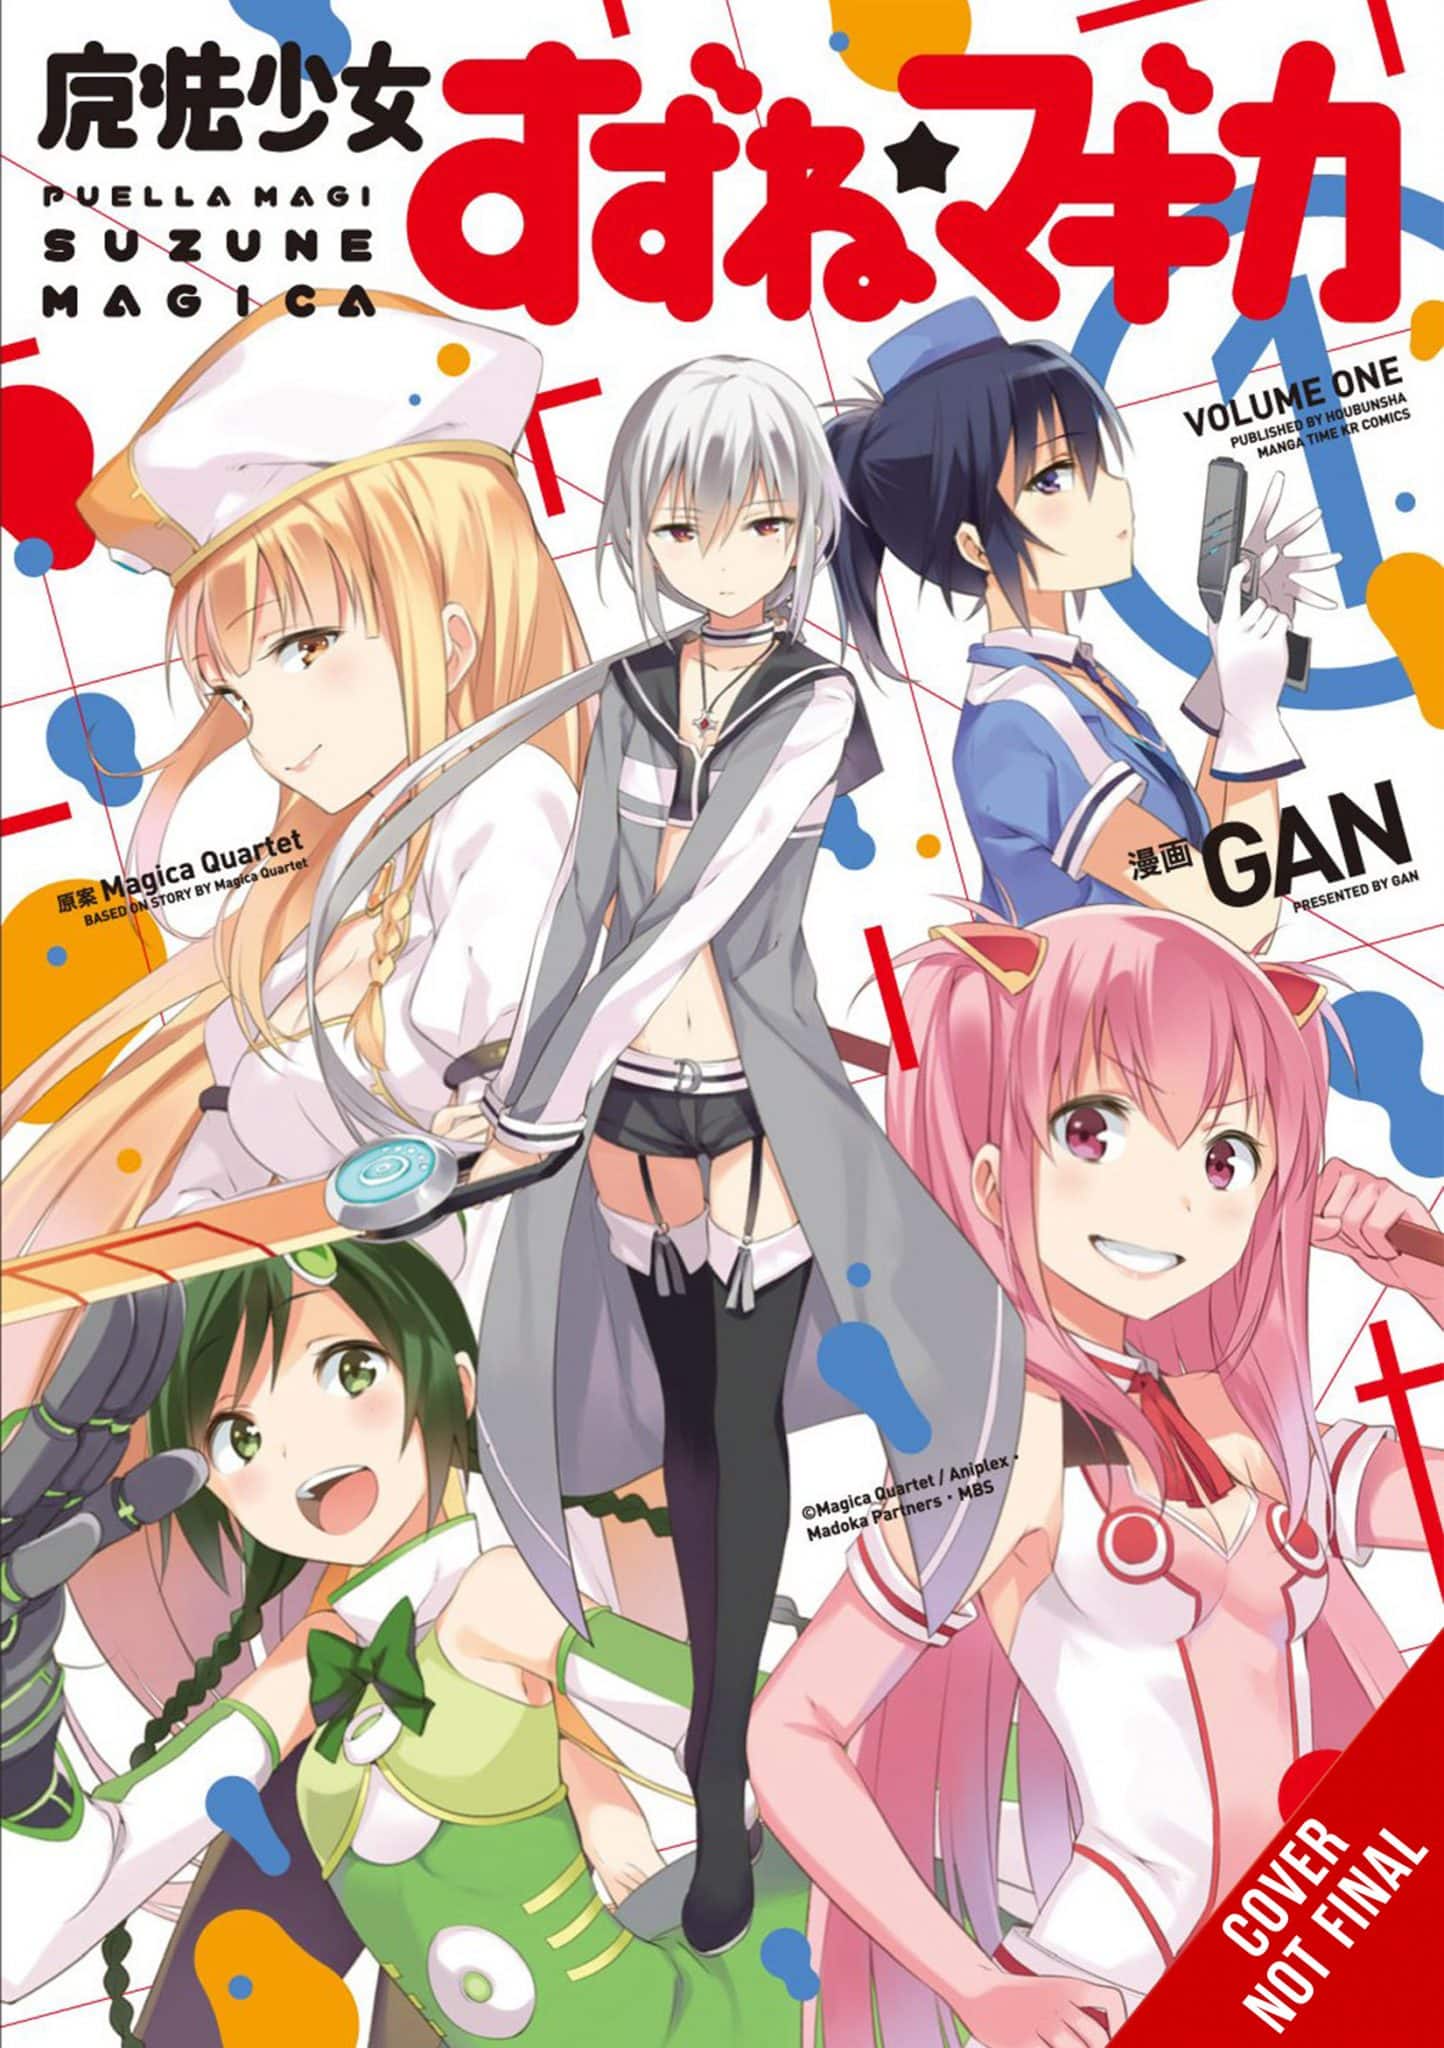 Yen Press Announces Over Two Dozen Acquisitions At Anime NYC 2022